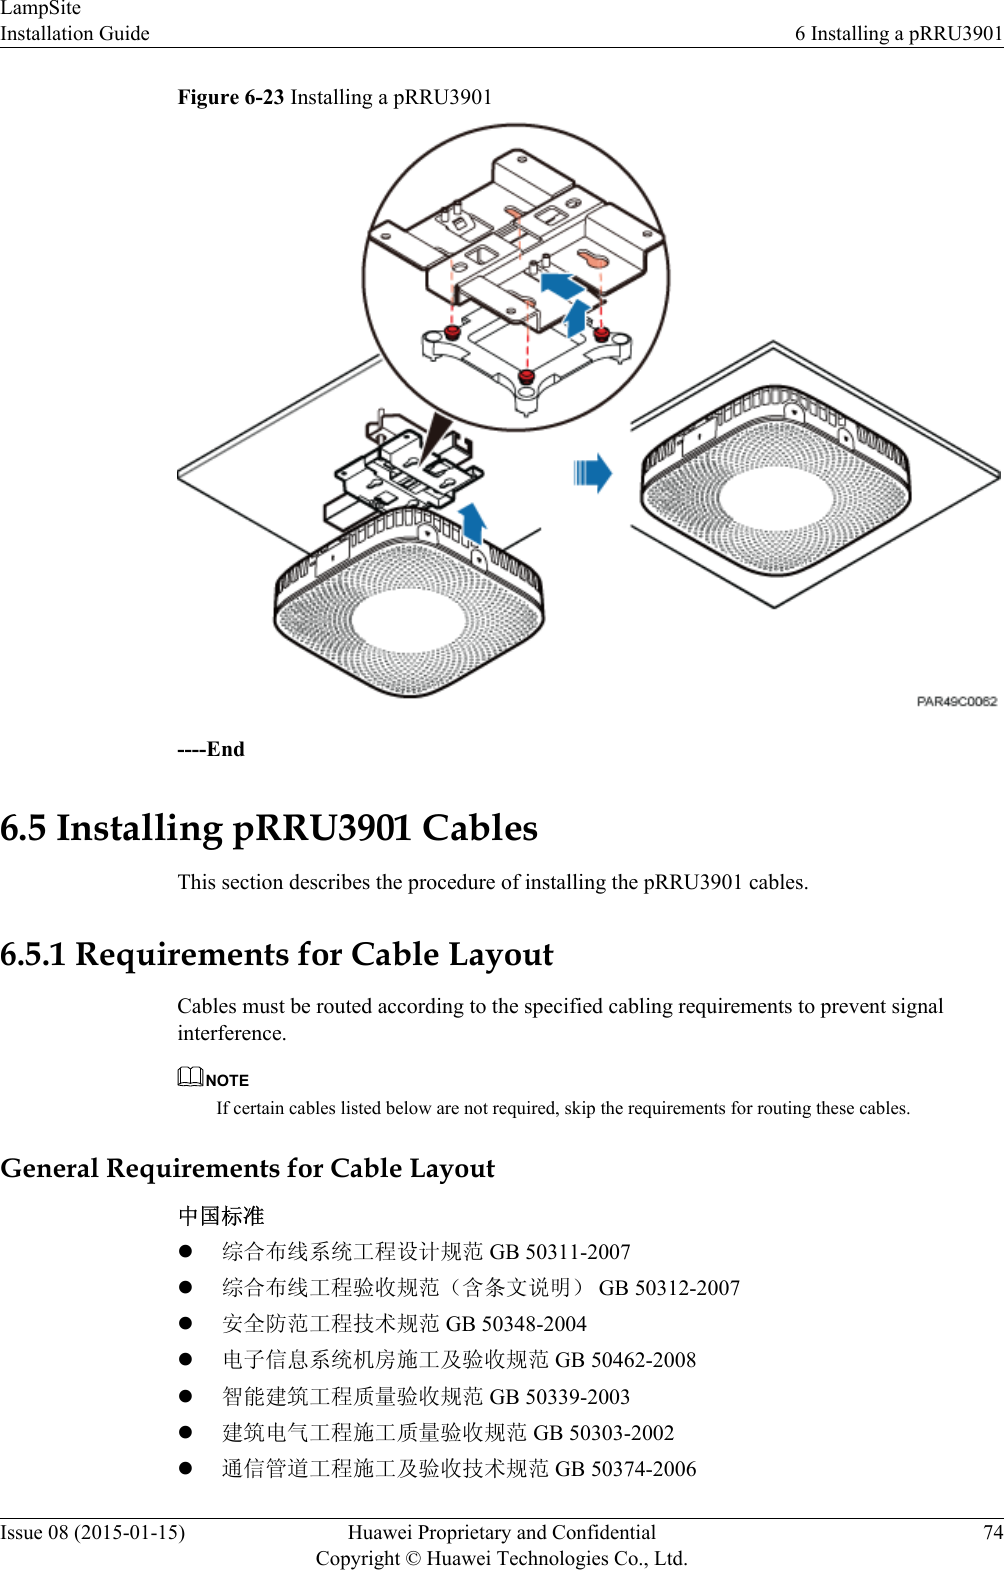 Figure 6-23 Installing a pRRU3901----End6.5 Installing pRRU3901 CablesThis section describes the procedure of installing the pRRU3901 cables.6.5.1 Requirements for Cable LayoutCables must be routed according to the specified cabling requirements to prevent signalinterference.NOTEIf certain cables listed below are not required, skip the requirements for routing these cables.General Requirements for Cable Layout中国标准l综合布线系统工程设计规范 GB 50311-2007l综合布线工程验收规范（含条文说明） GB 50312-2007l安全防范工程技术规范 GB 50348-2004l电子信息系统机房施工及验收规范 GB 50462-2008l智能建筑工程质量验收规范 GB 50339-2003l建筑电气工程施工质量验收规范 GB 50303-2002l通信管道工程施工及验收技术规范 GB 50374-2006LampSiteInstallation Guide 6 Installing a pRRU3901Issue 08 (2015-01-15) Huawei Proprietary and ConfidentialCopyright © Huawei Technologies Co., Ltd.74